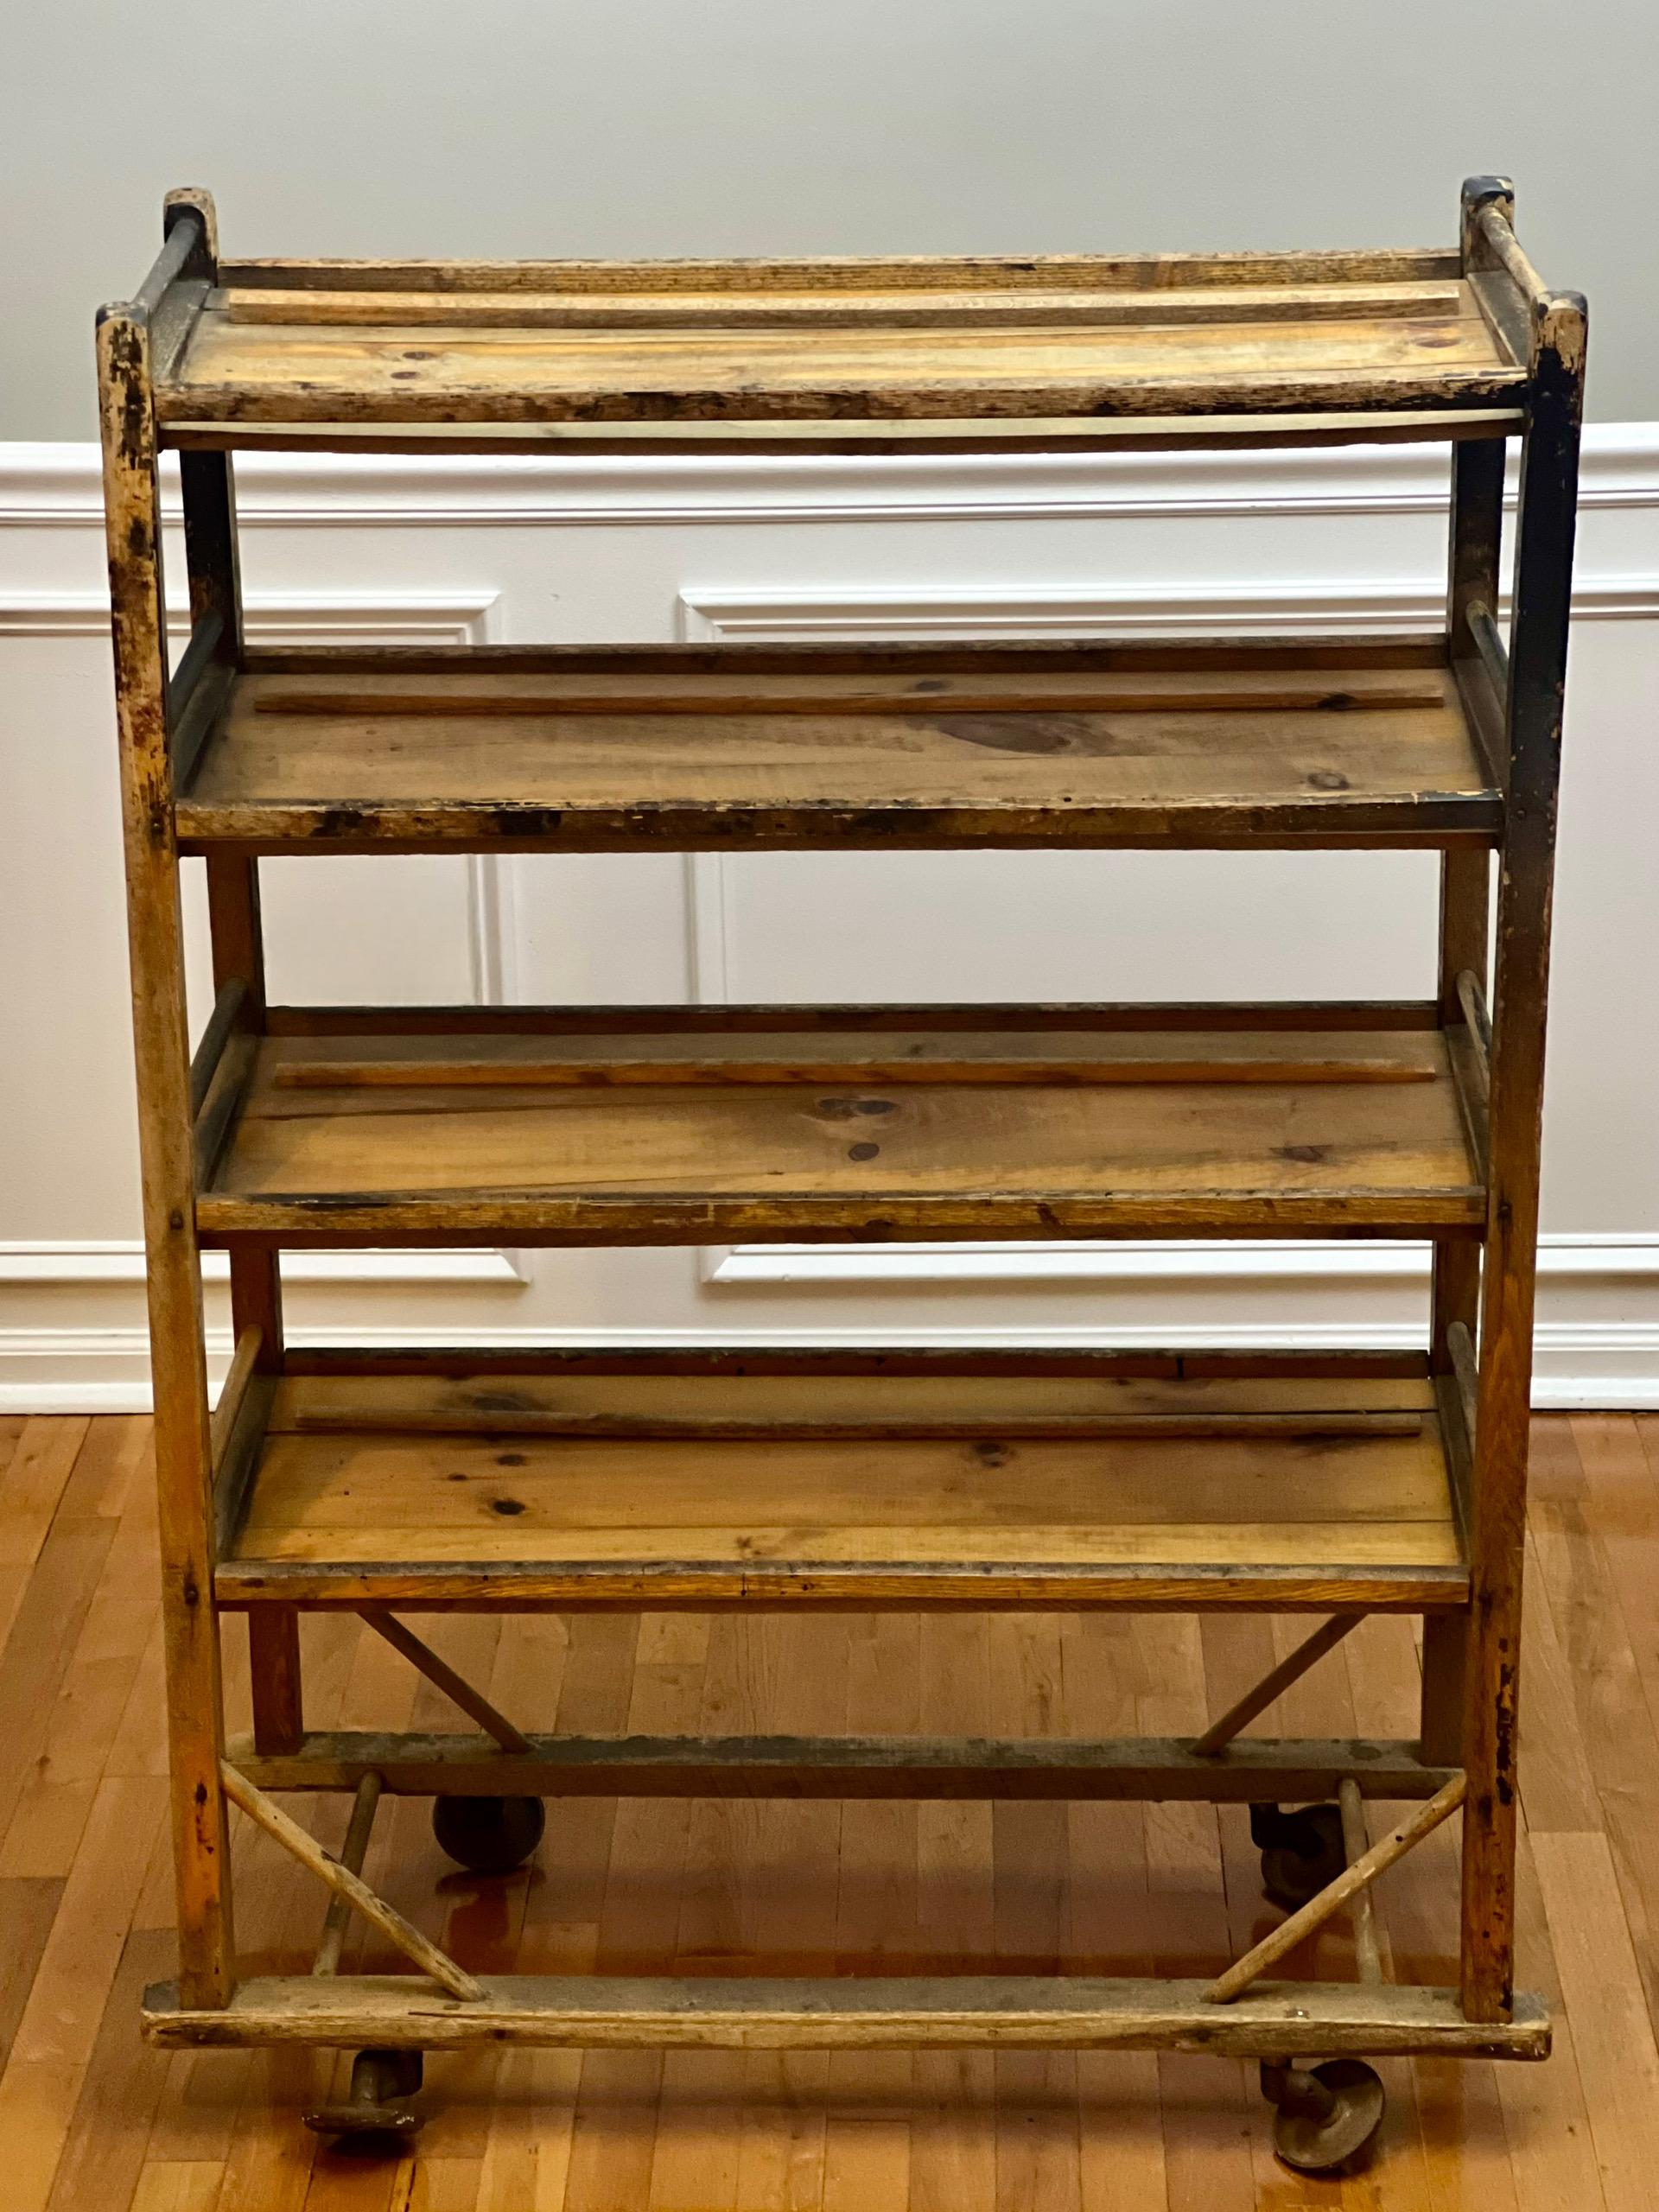 Industrial rolling shoe rack, c. late 19th century.

These shelf units are so versatile and great for almost anything. Originally used in a shoe factory to transport product from one step to another in the manufacturing process. It features four